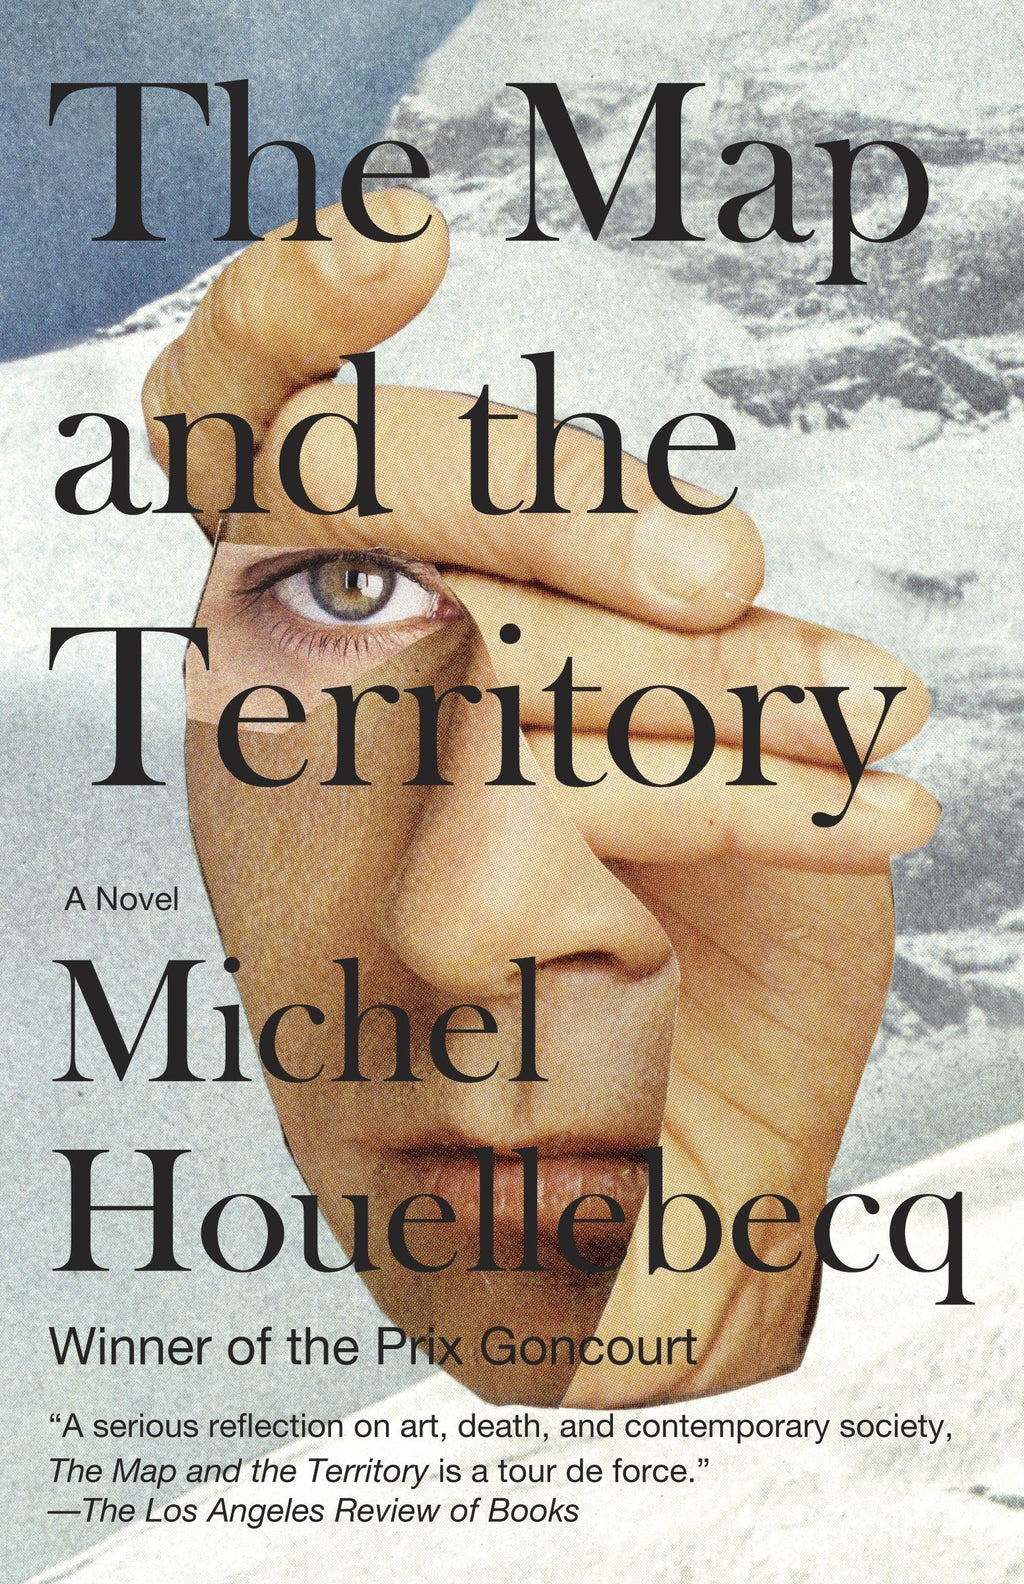 The Map and the Territory by Michel Houellebecq